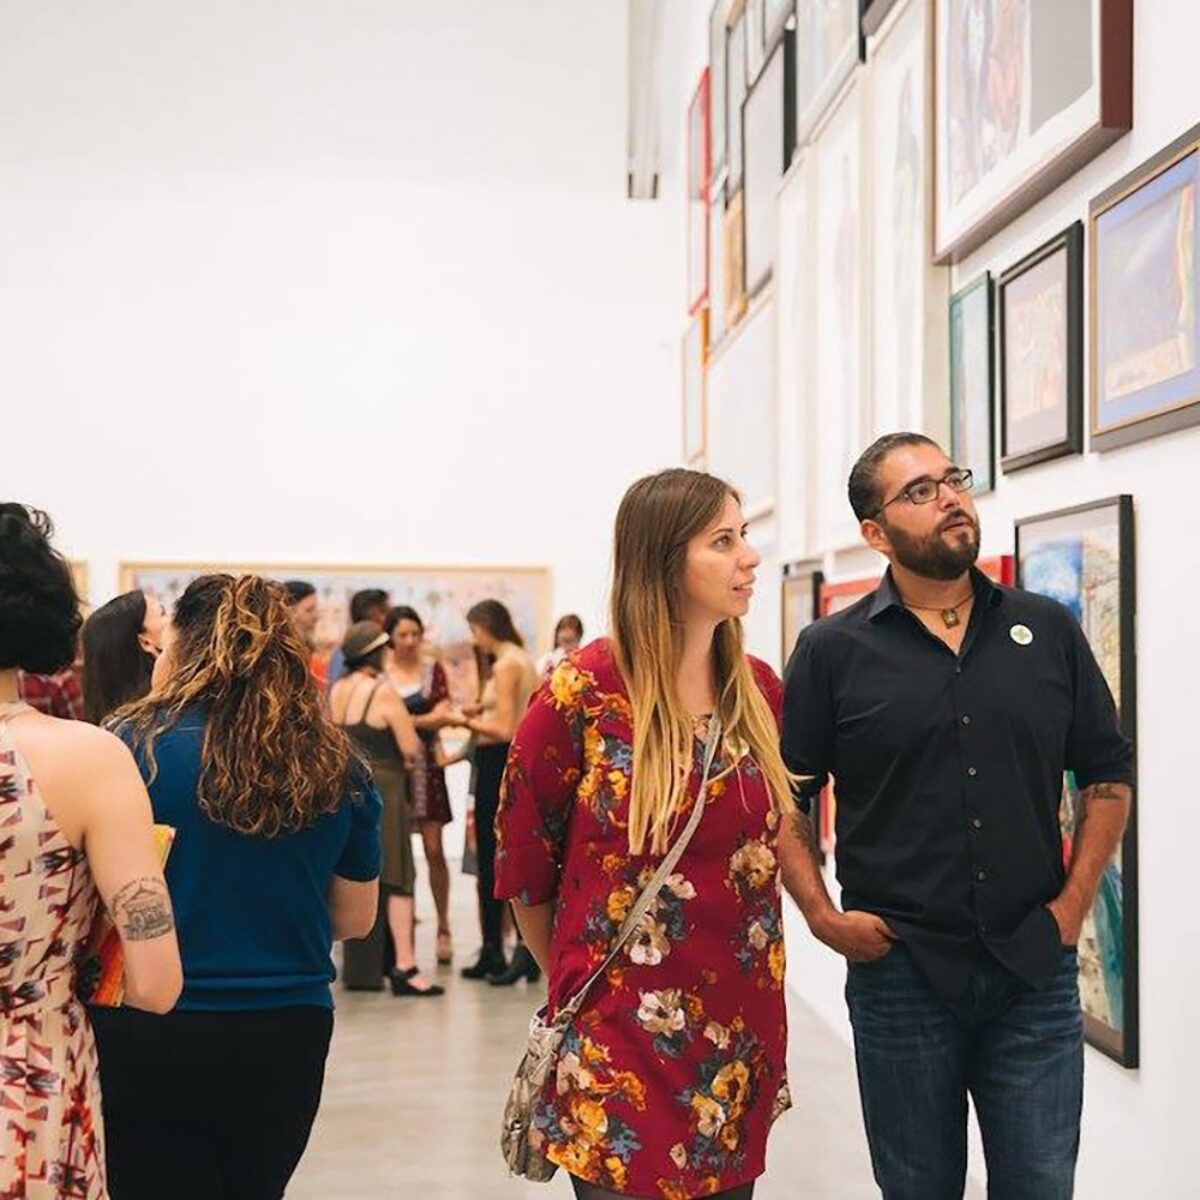 Supporters of MCASD in gallery